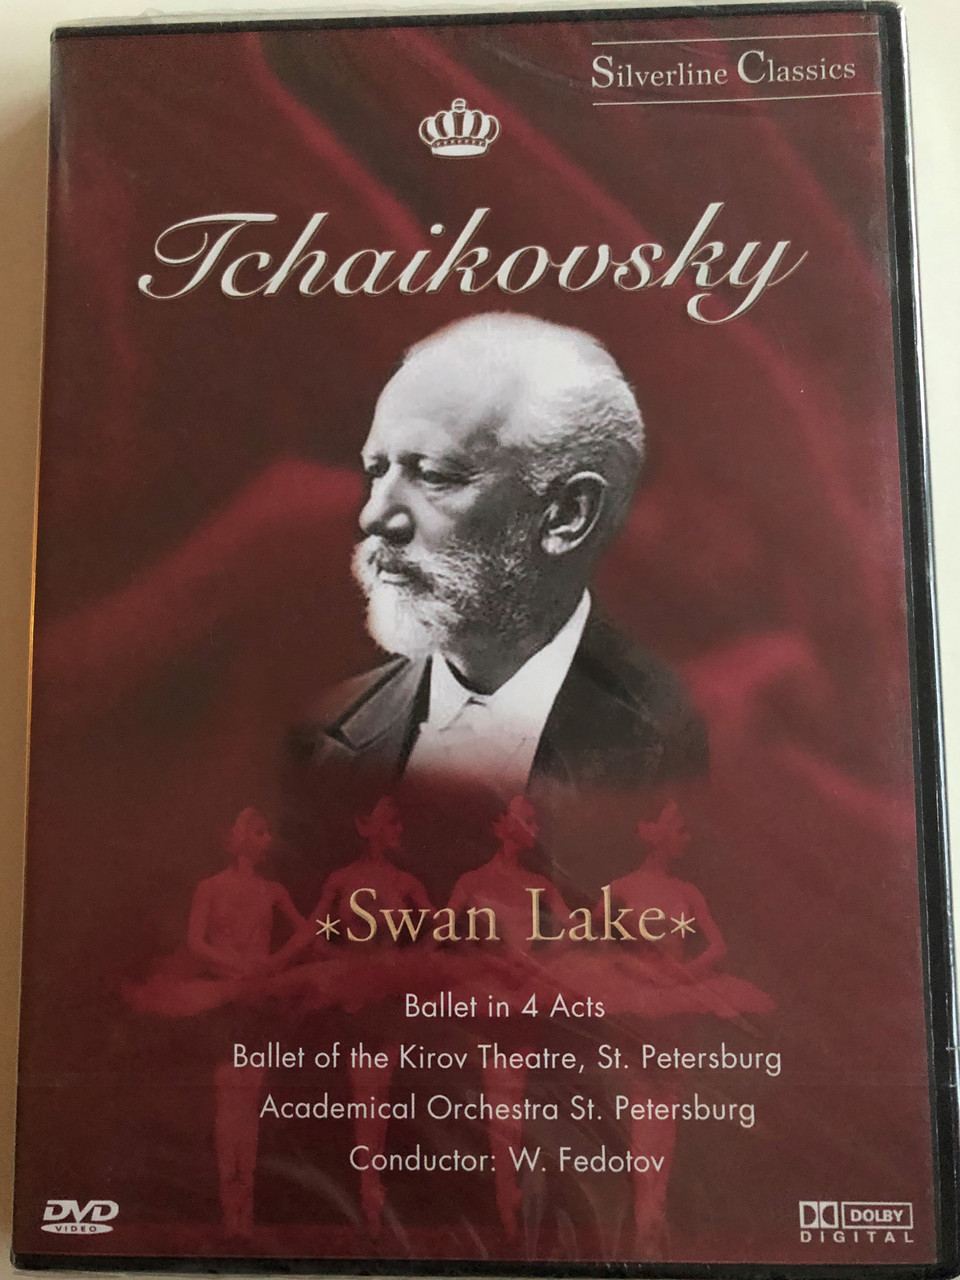 Tchaikovsky - Swan Lake DVD 1968 / Ballet in 4 acts / Ballet of the Kirov  Theatre St. Petersurg / Conducted by W. Fedotov / Directed by Appollinary  DudkoSilverline Classics / Historical recording from 1968 - Bible in My  Language